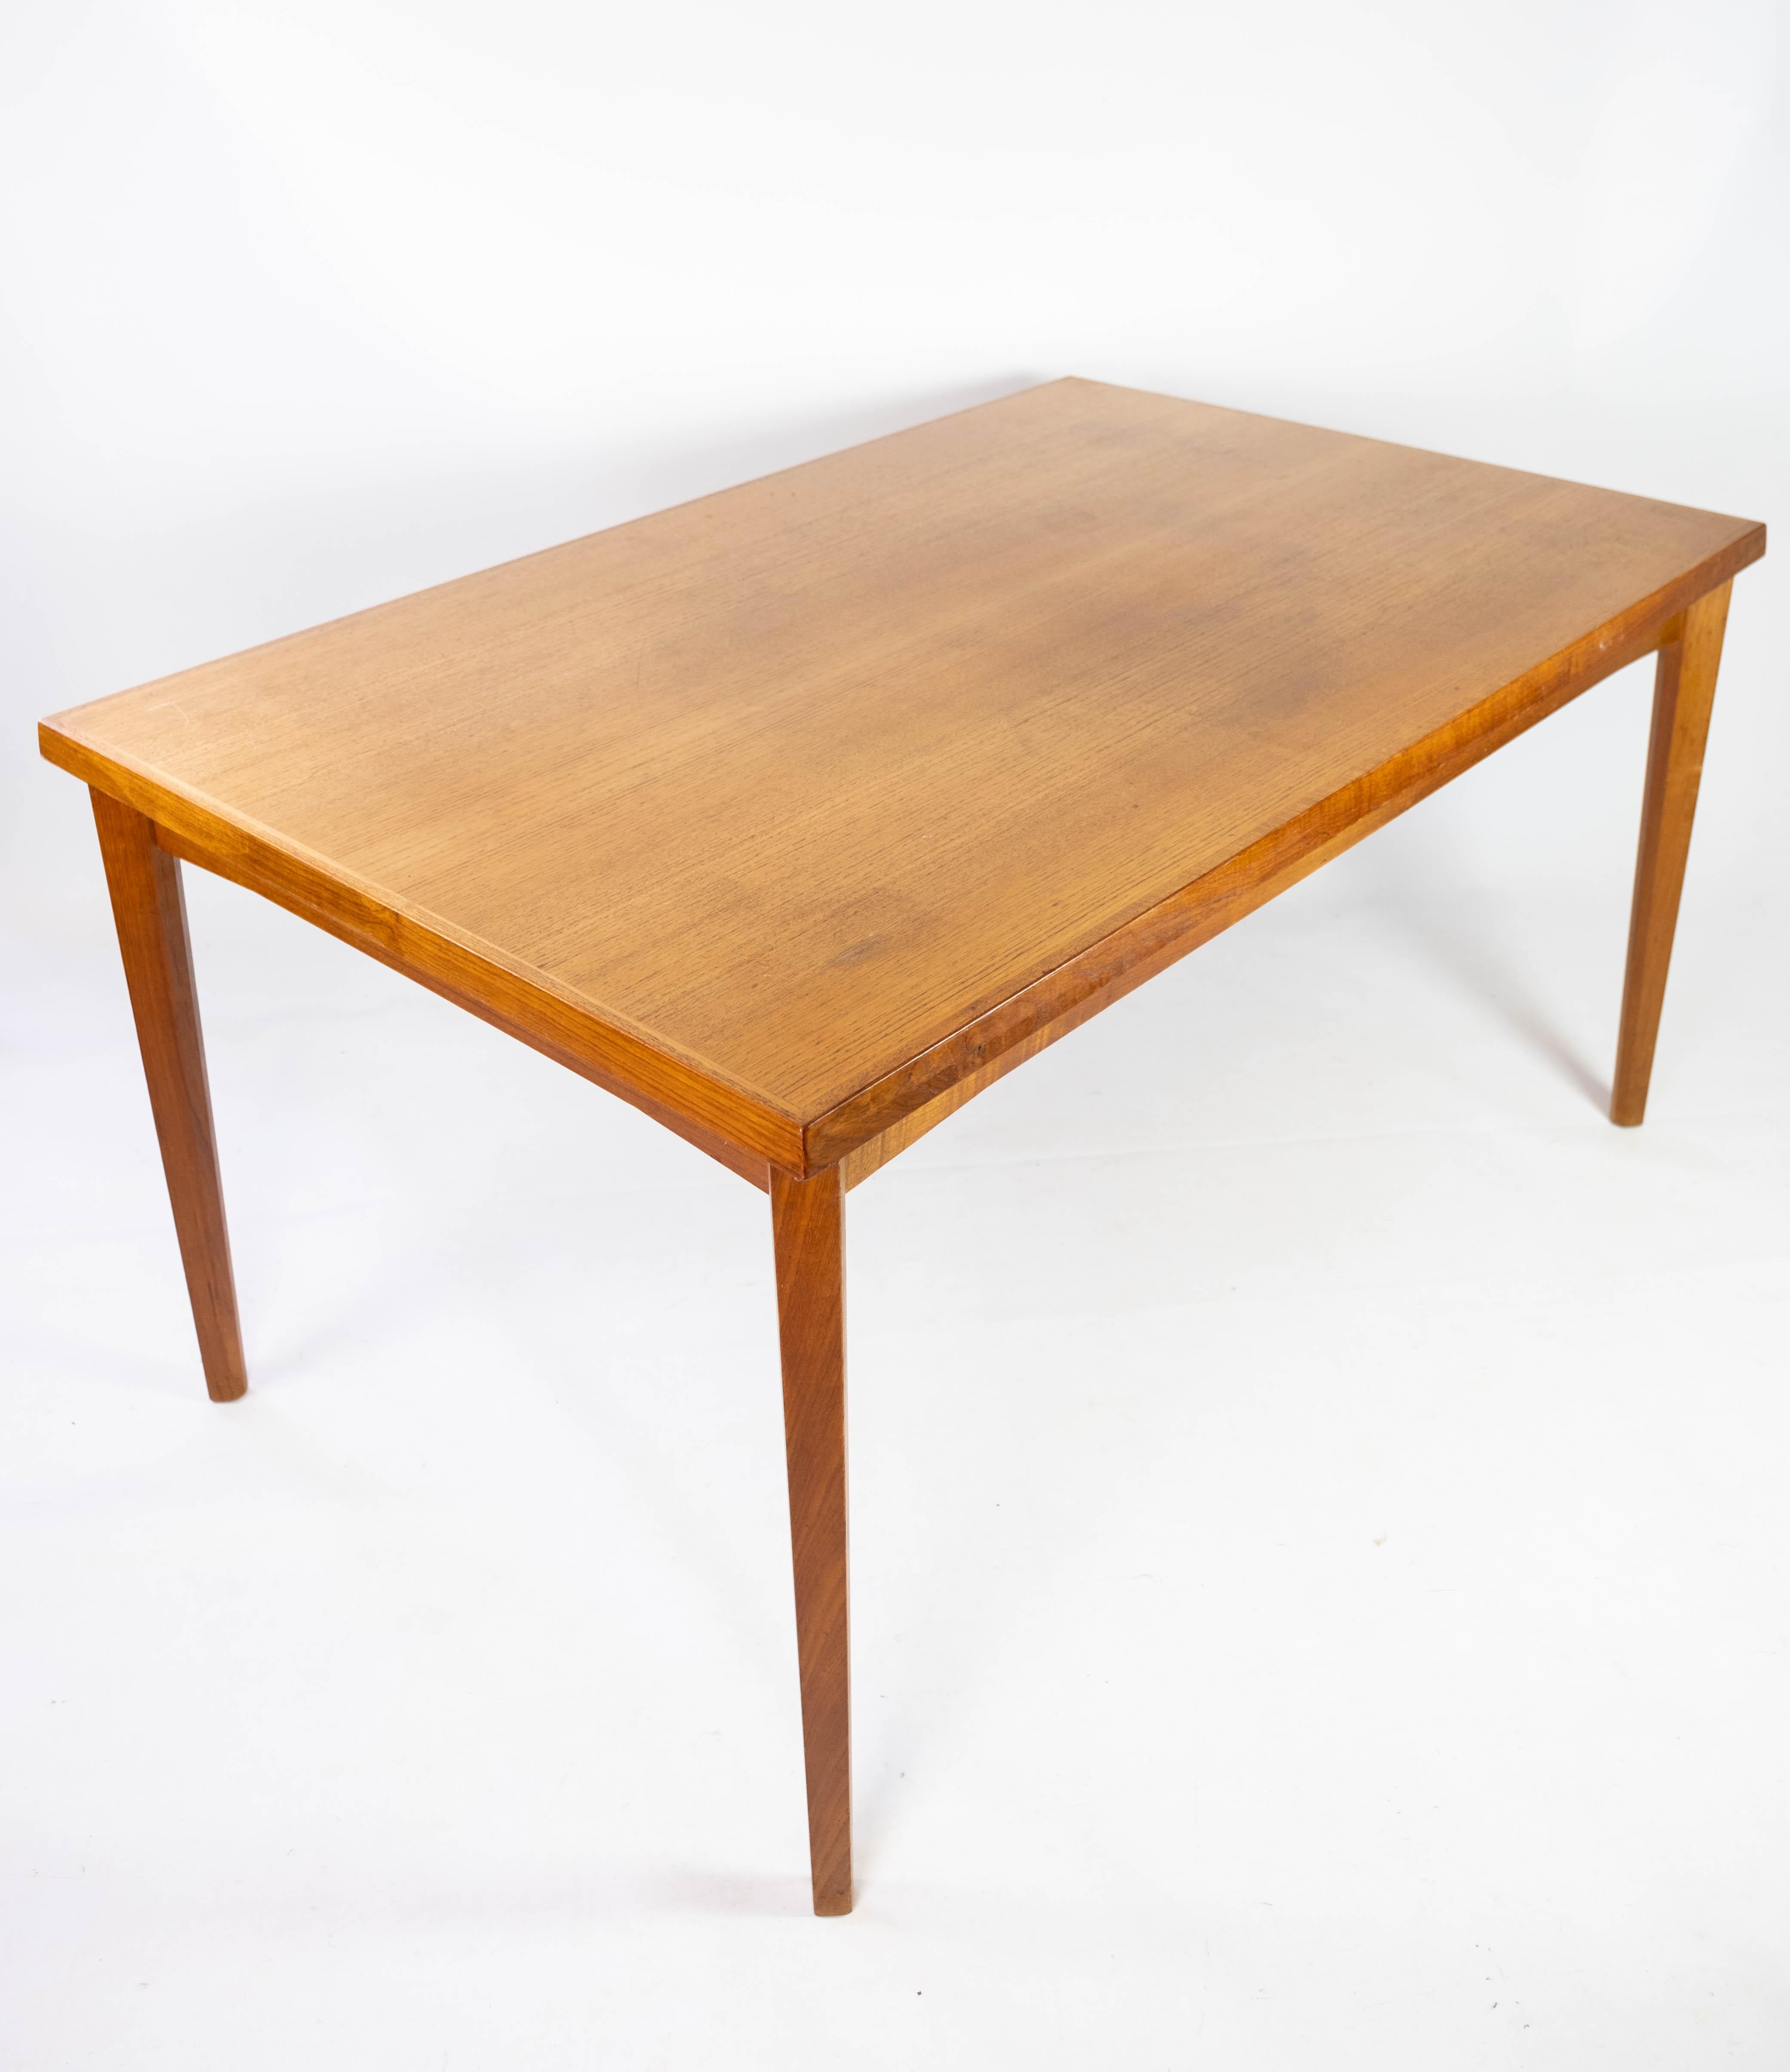 Dining Table With Extensions Made In Teak, Danish Design From 1960s For Sale 1